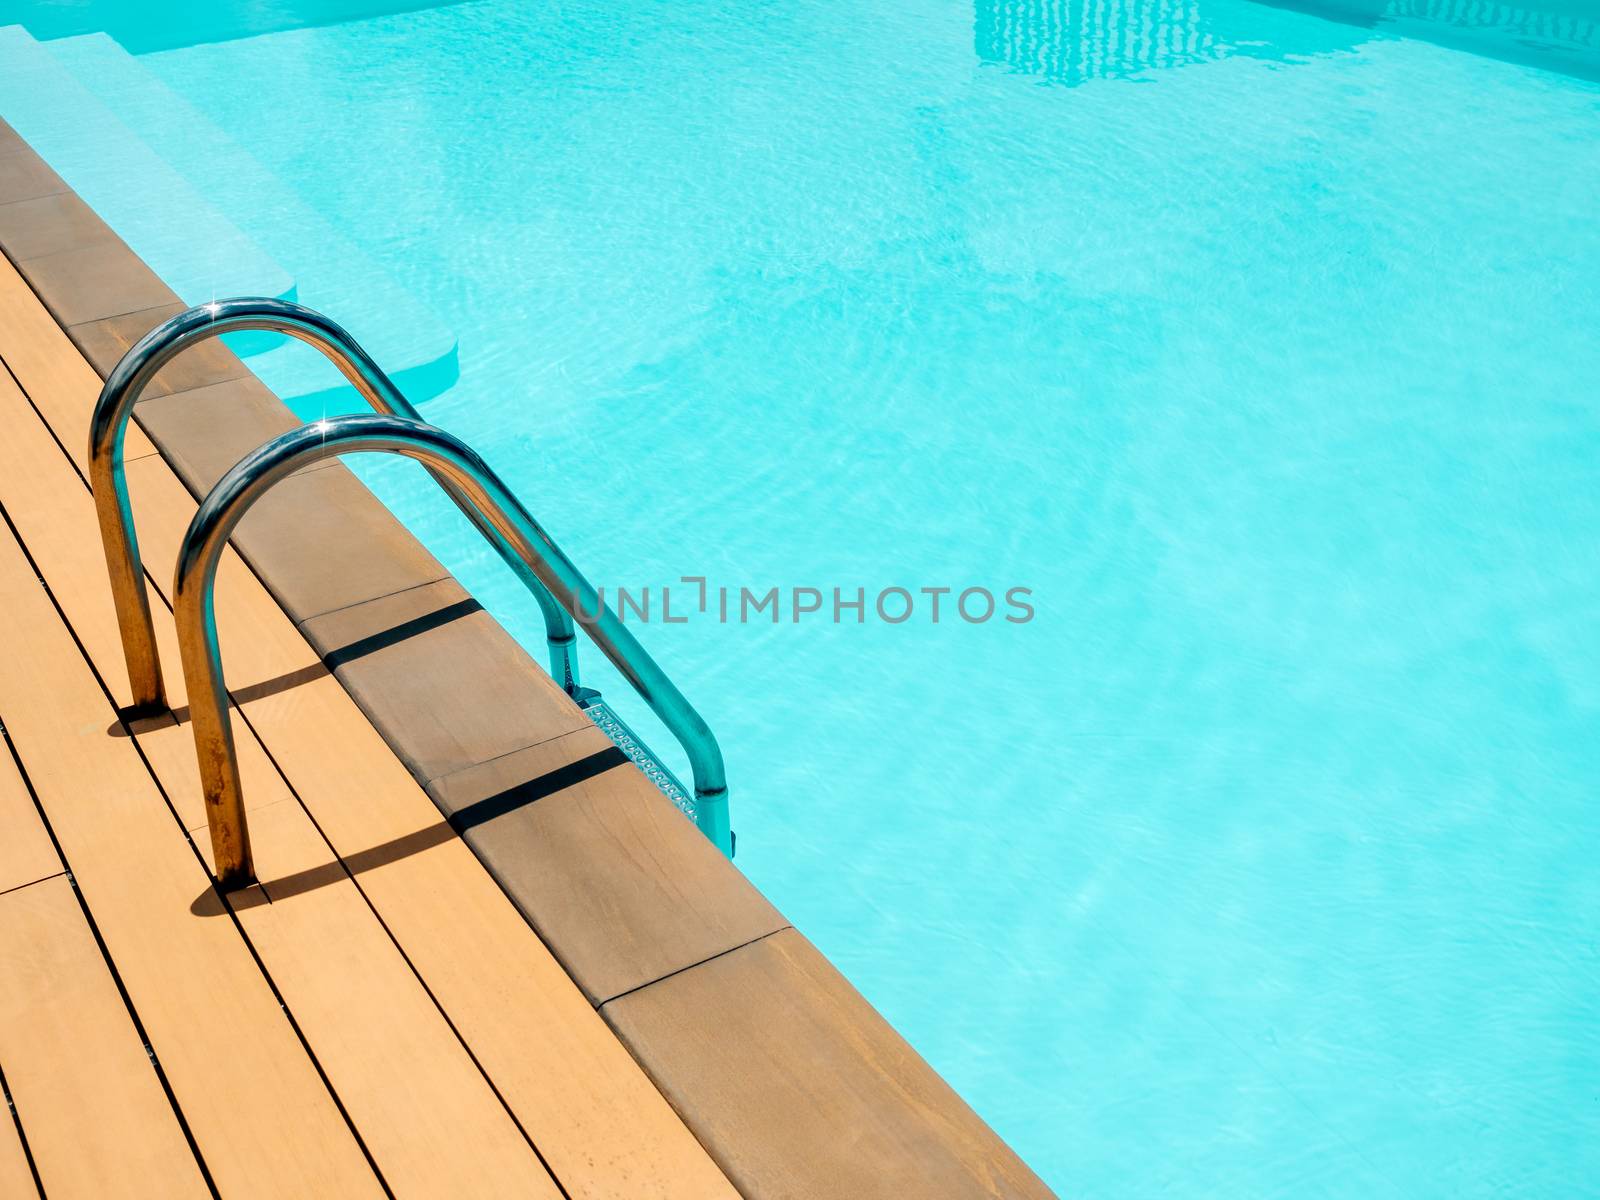 Outdoor swimming pool background minimal style. Grab bars ladder in the blue swimming pool with copy space.